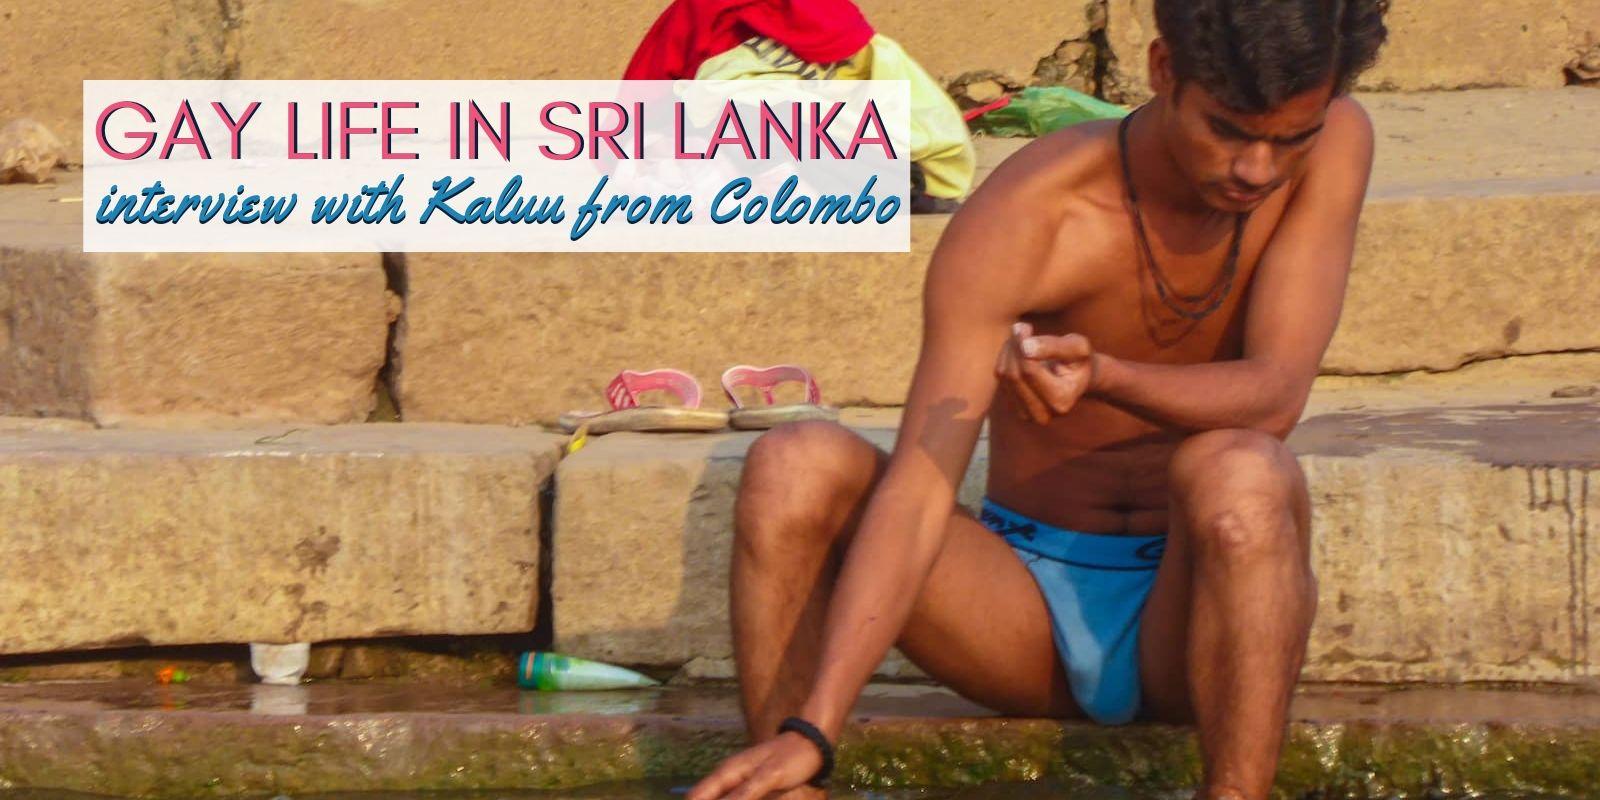 Our gay friend Kaluu from Sri Lanka tells us what gay life in his country i...